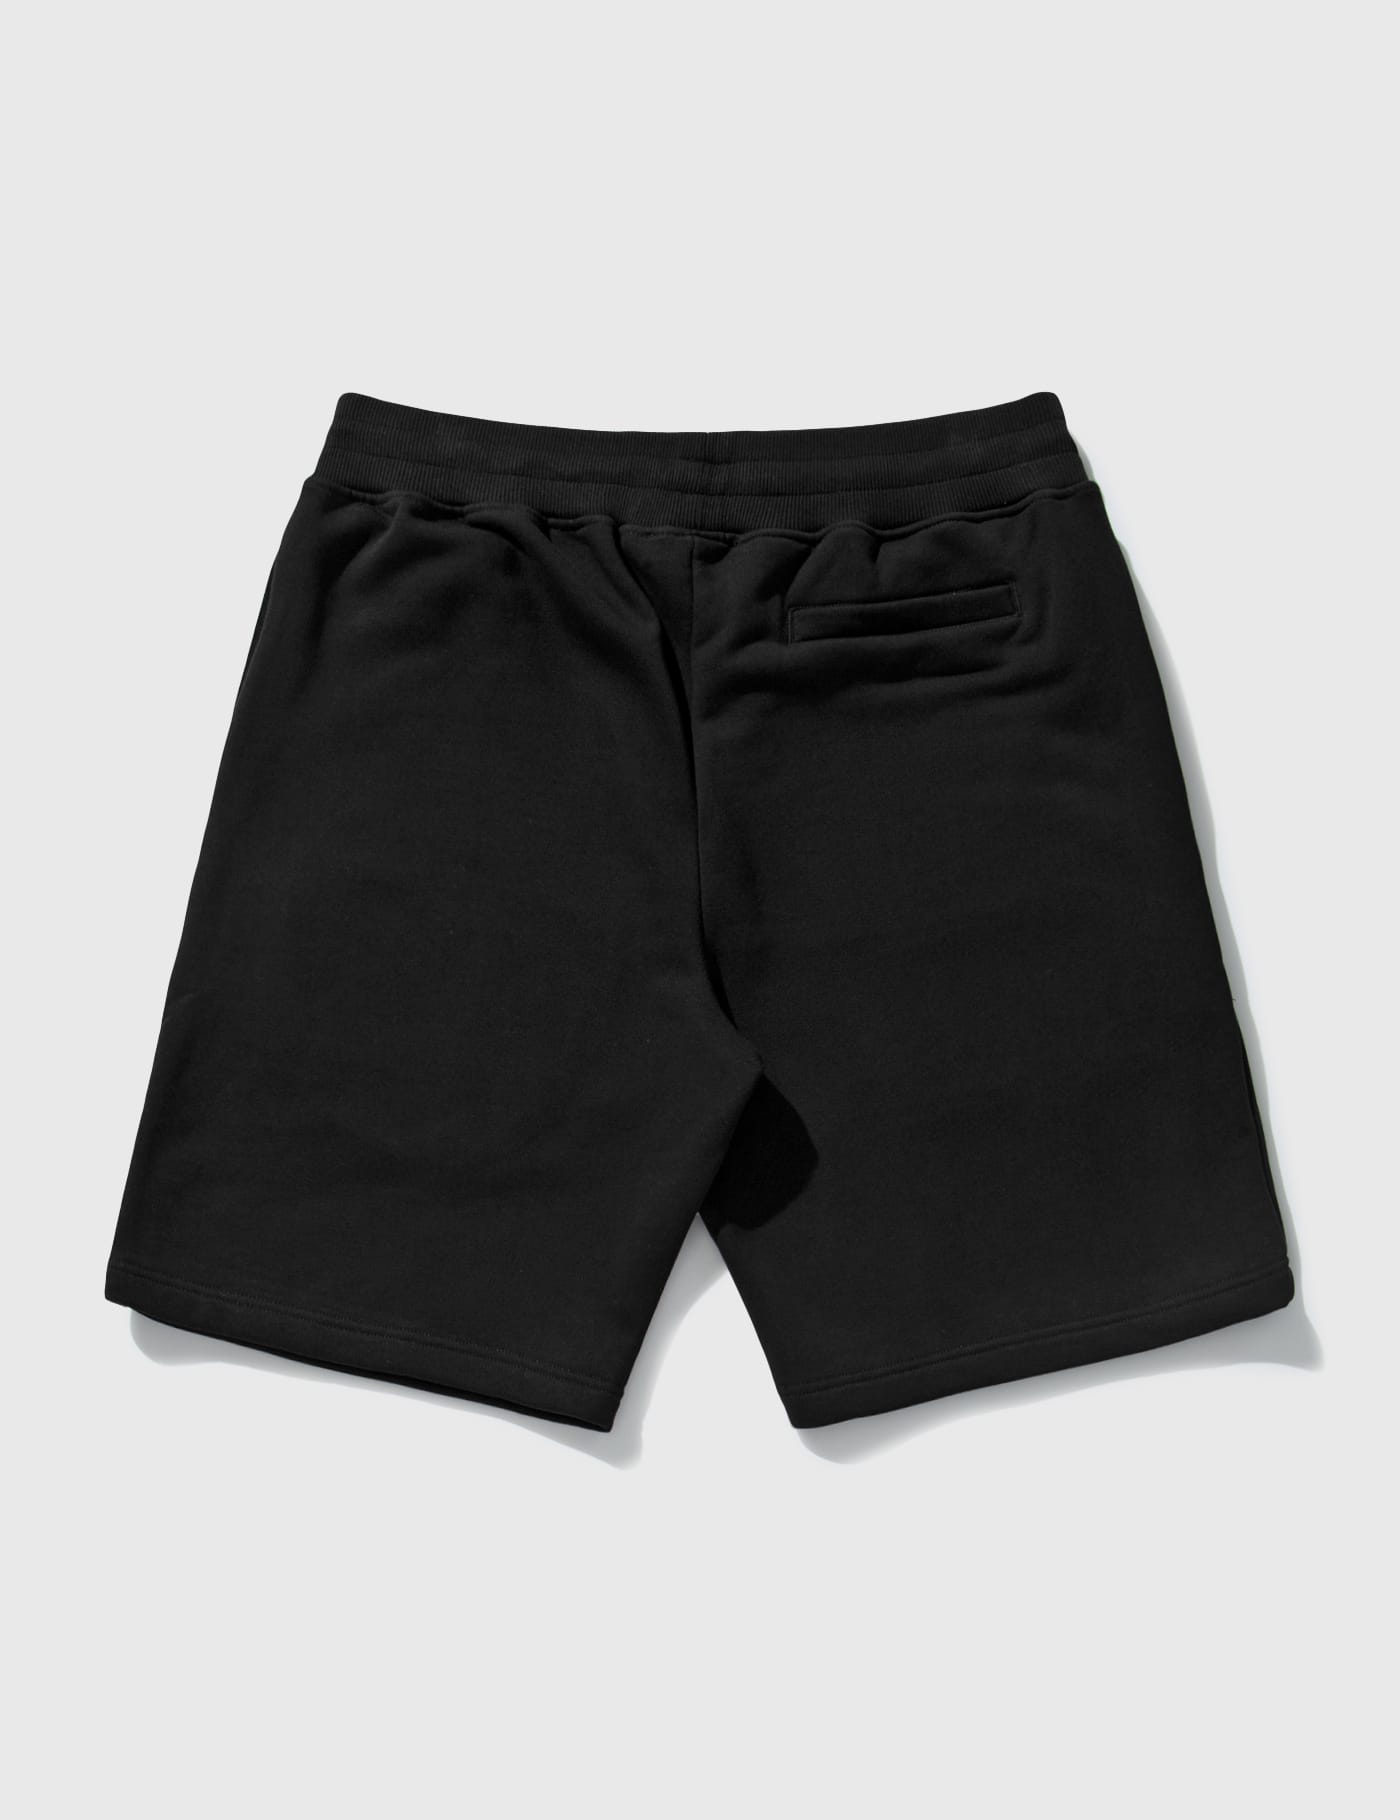 A-COLD-WALL* - Essential Logo Sweat Shorts | HBX - Globally 